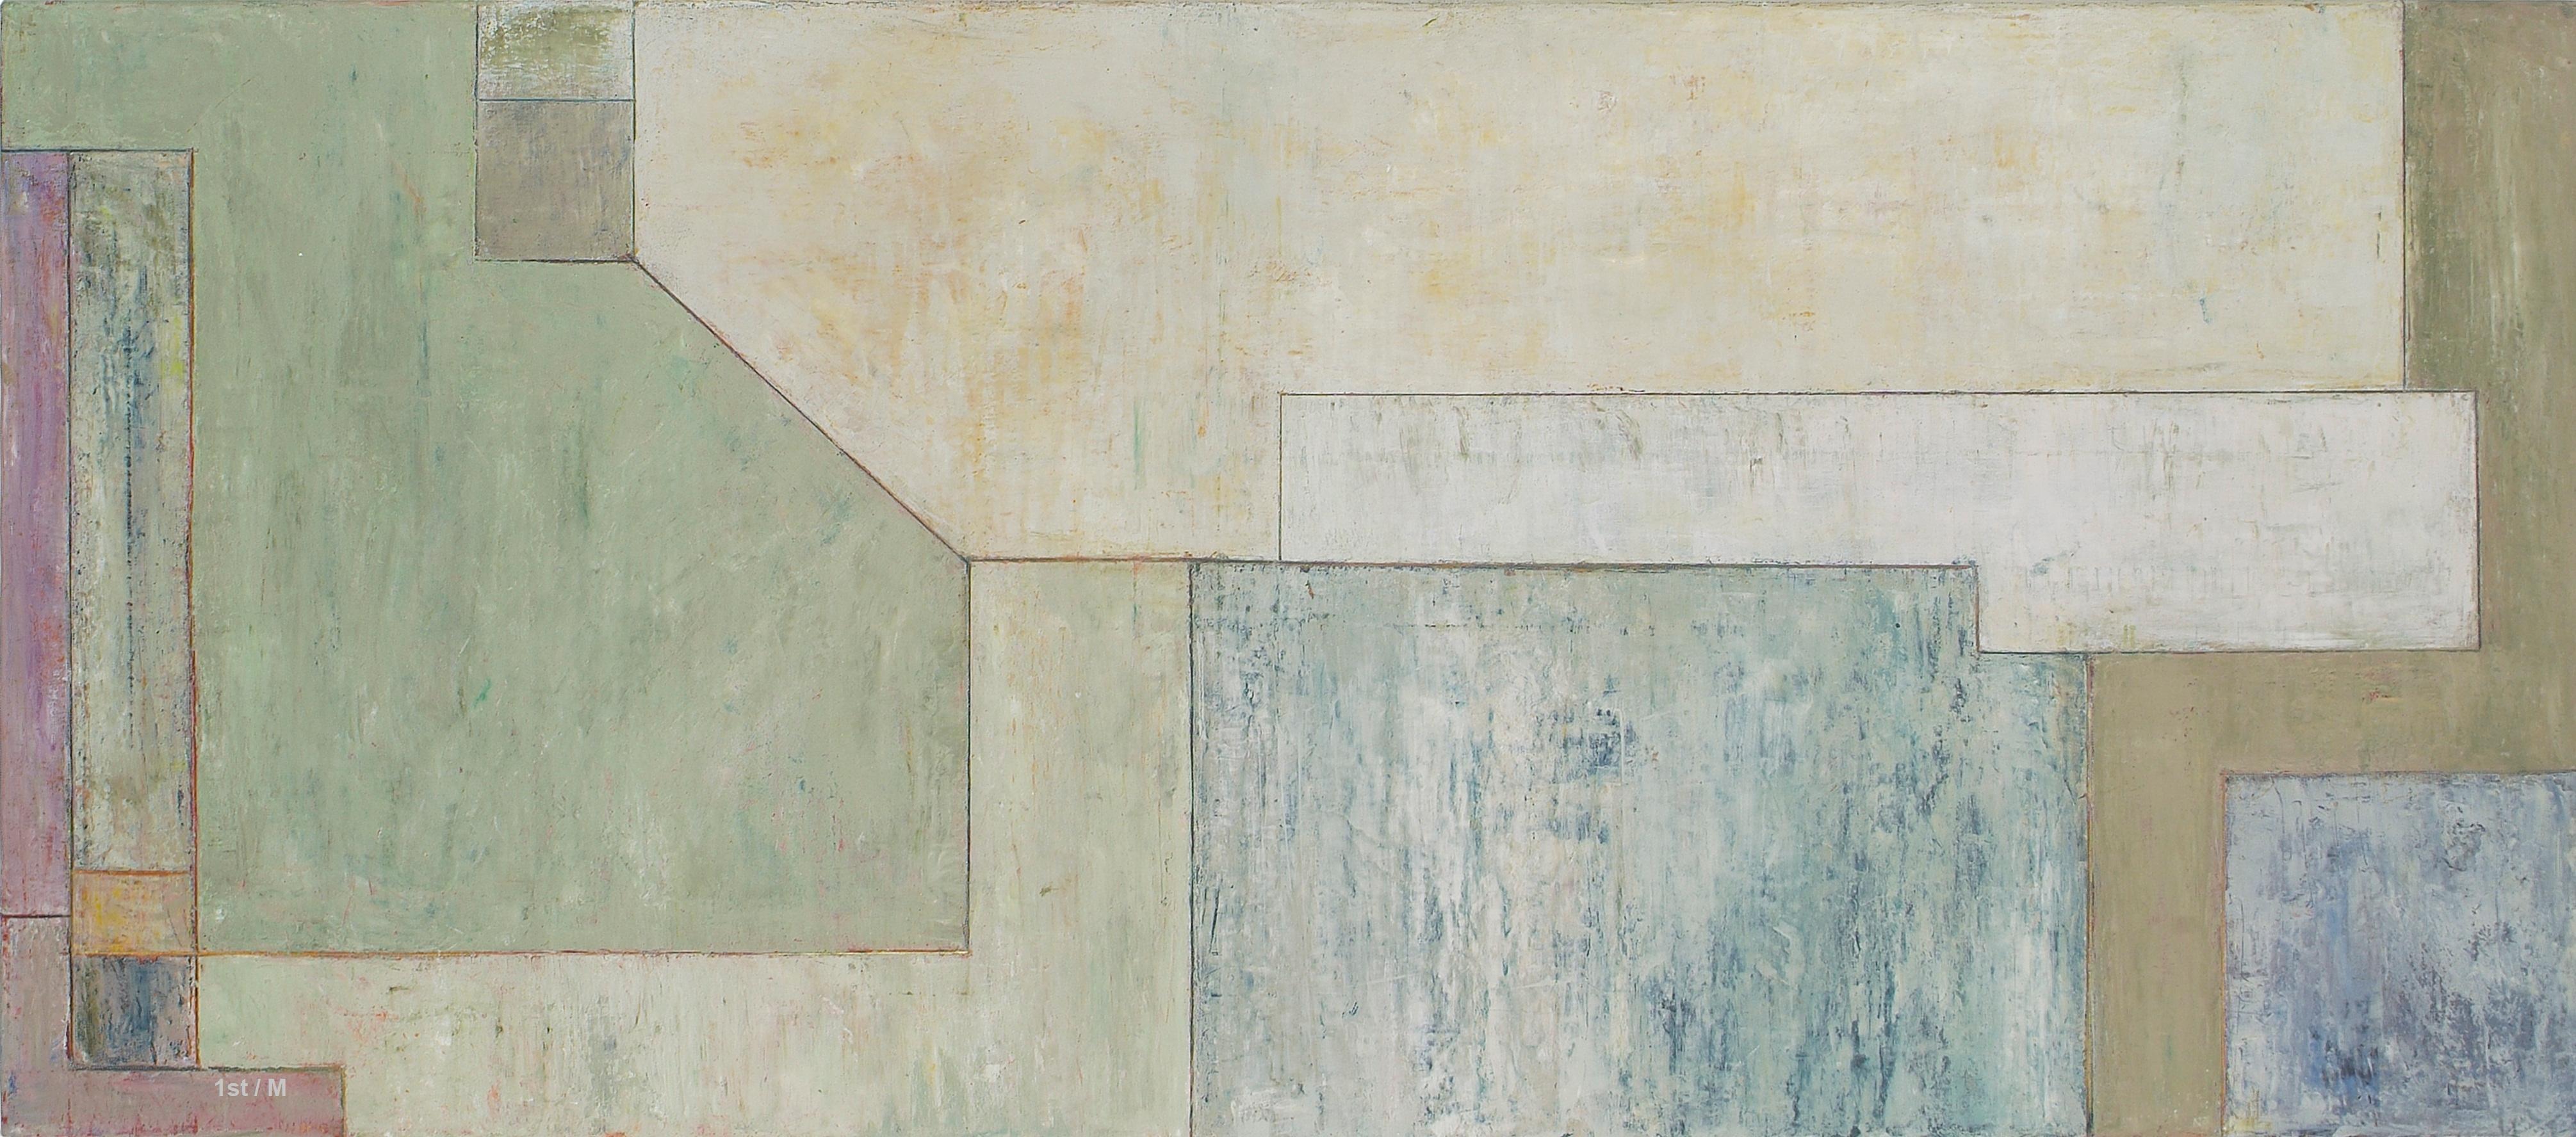 Stephen Cimini Figurative Painting - 28x64x2" Large horizontal abstract oil painting - architectural form, neutral